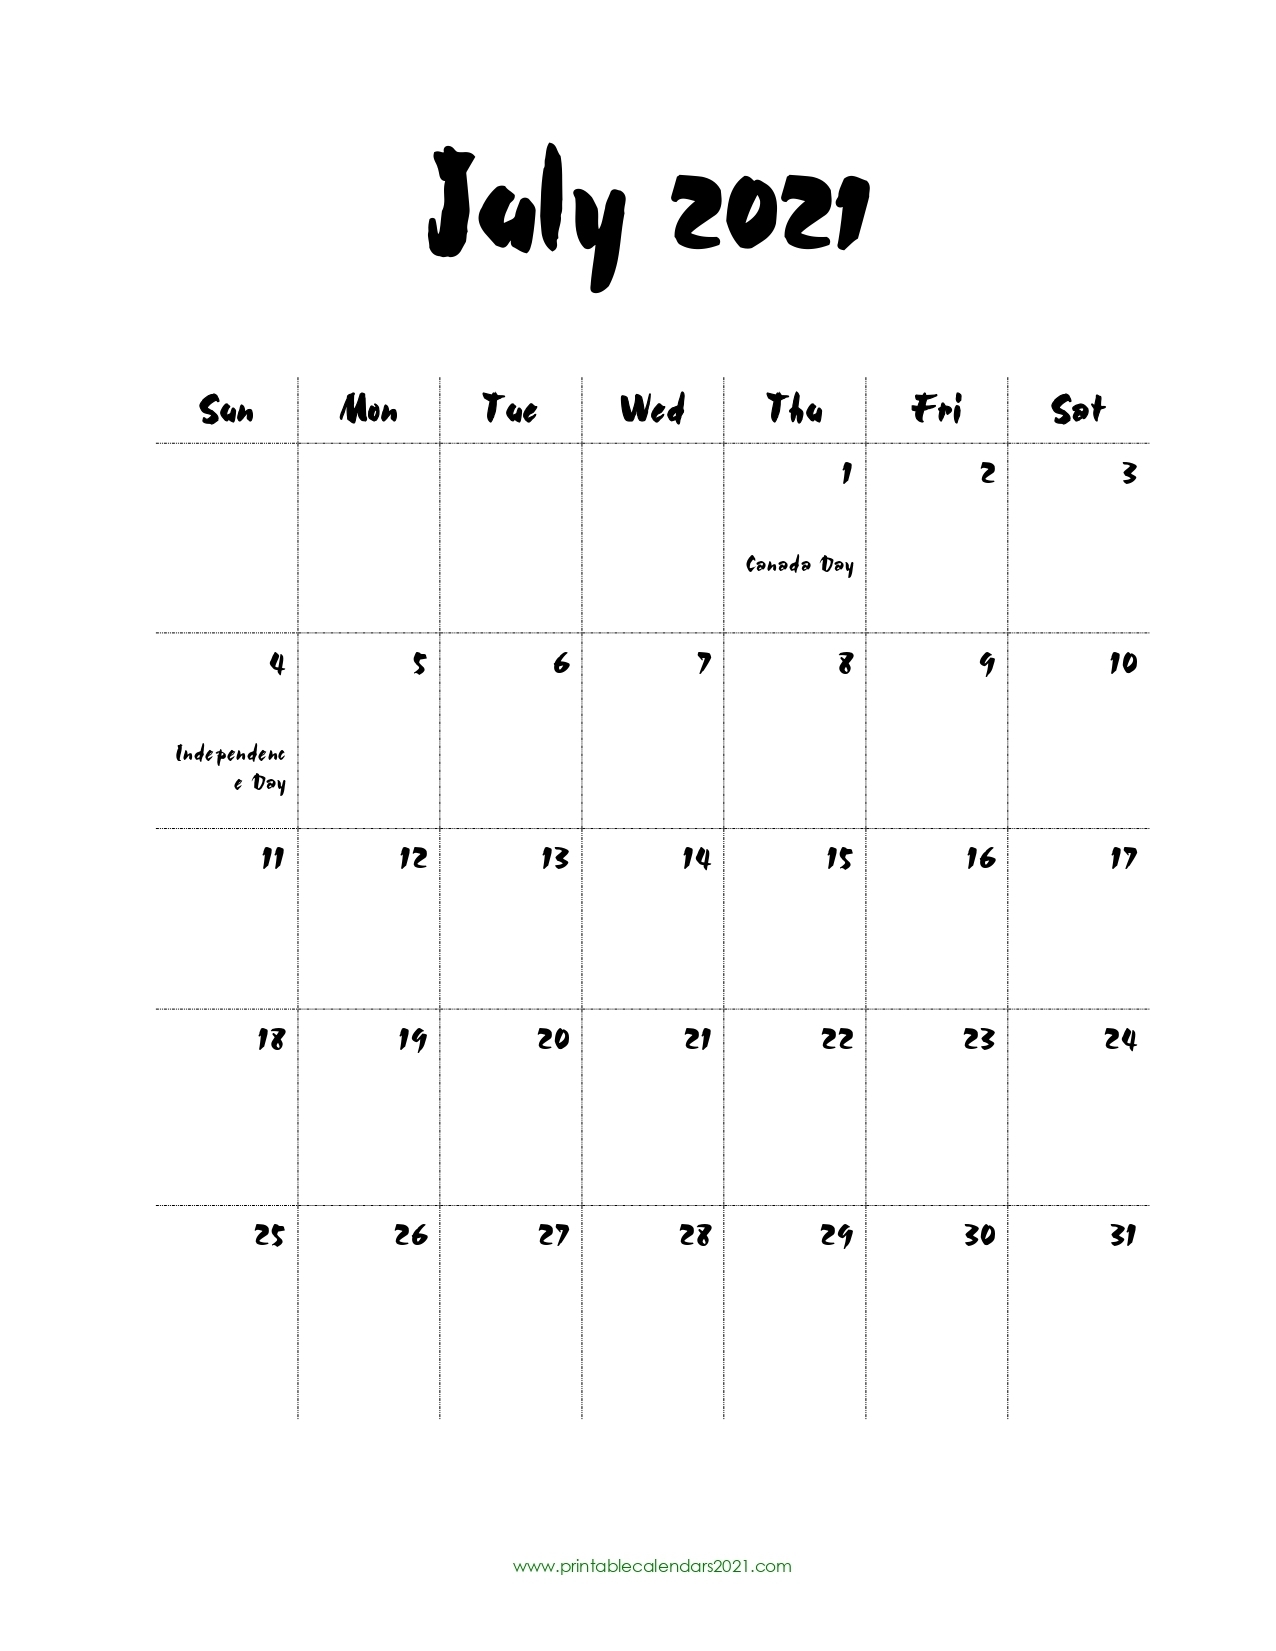 Pick Print Free July 2021 Calendar Without Downloading